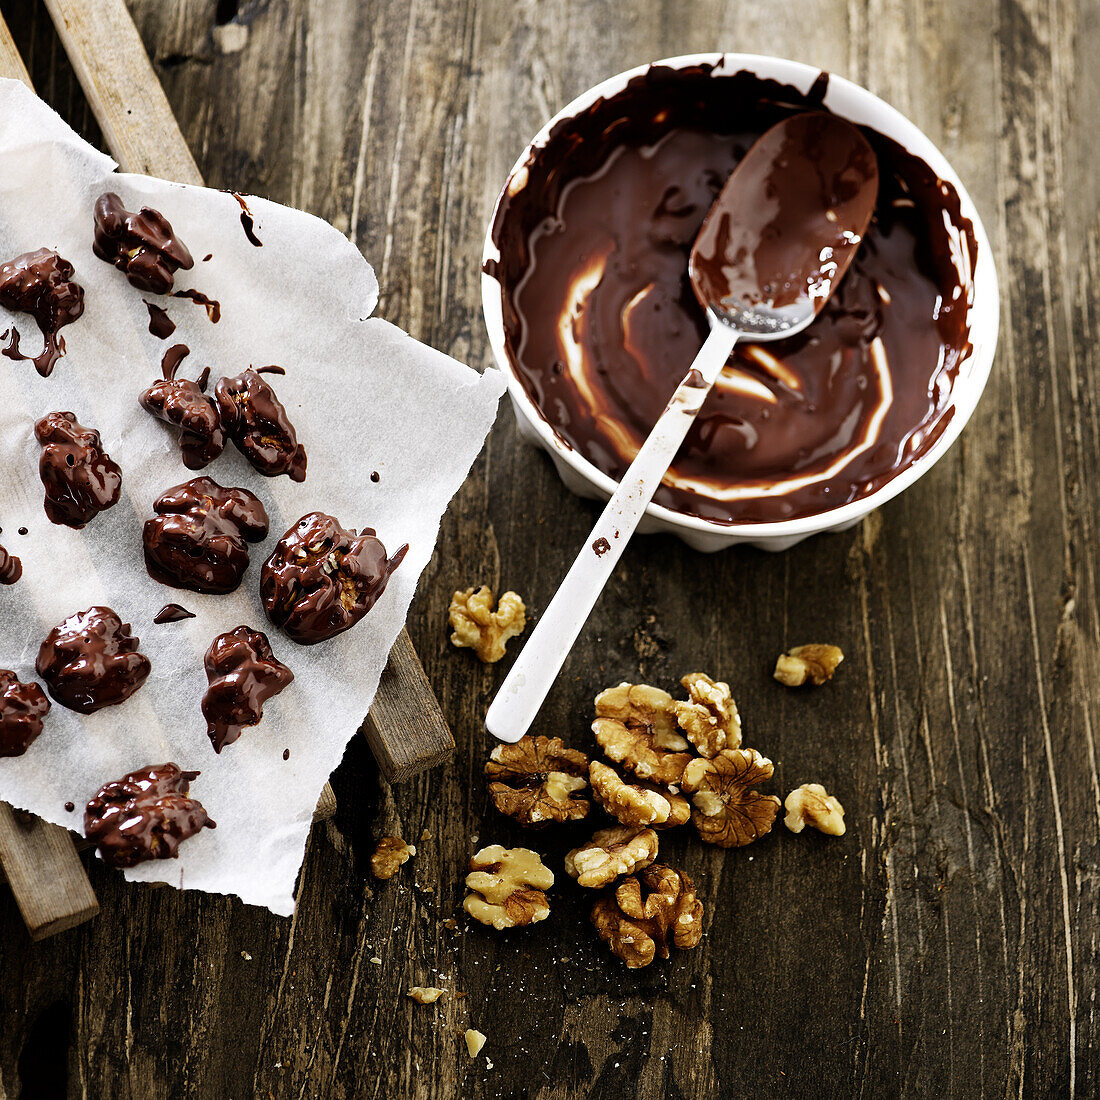 Walnuts with melted chocolate